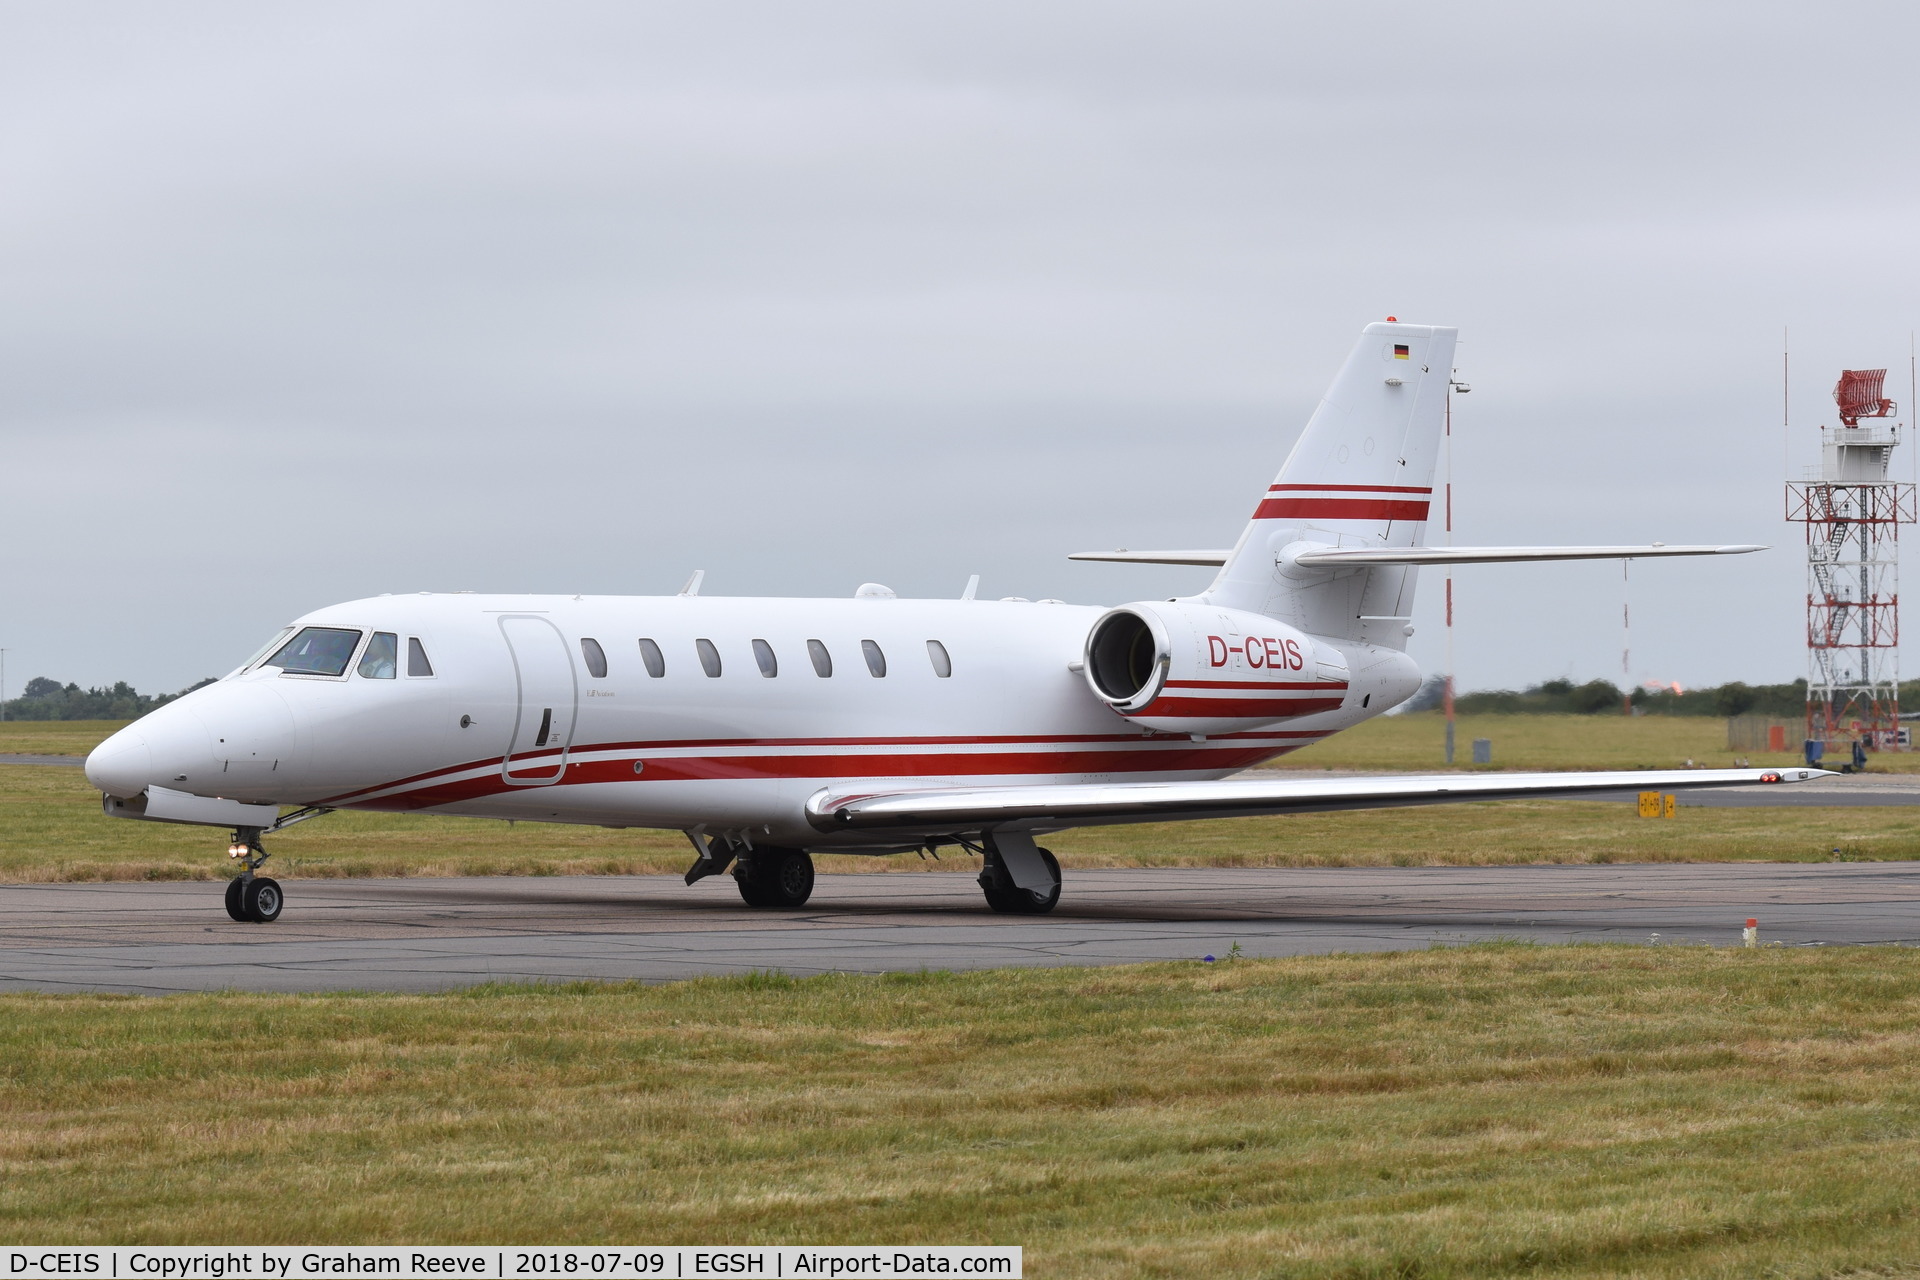 D-CEIS, 2008 Cessna 680 Citation Sovereign C/N 680-0185, Just landed at Norwich.